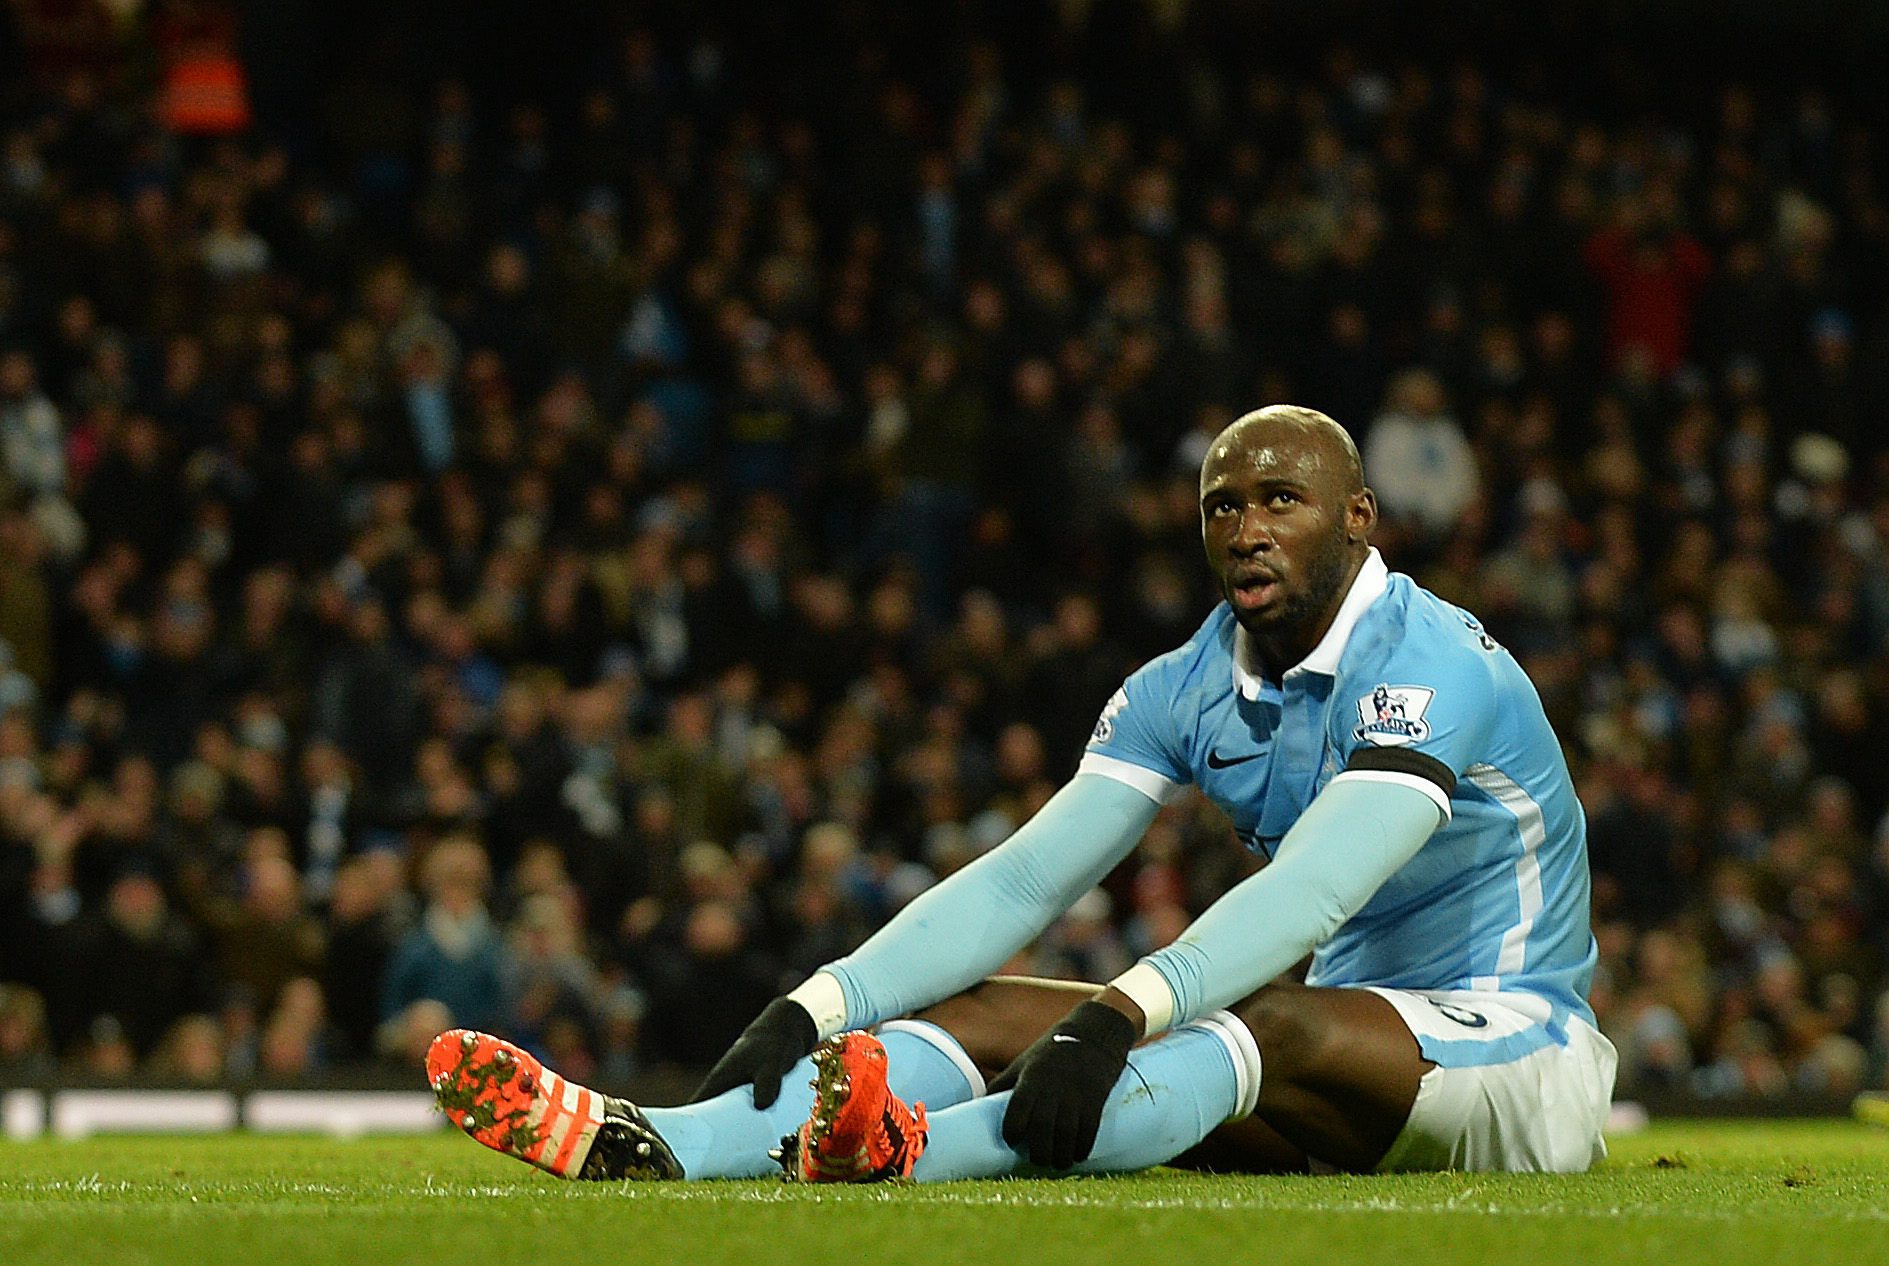 Eliaquim Mangala has failed to make it into Pep Guardiola's plans at Manchester City and is likely to leave the club before the end of the transfer window. (Picture Courtesy - AFP/Getty Images)